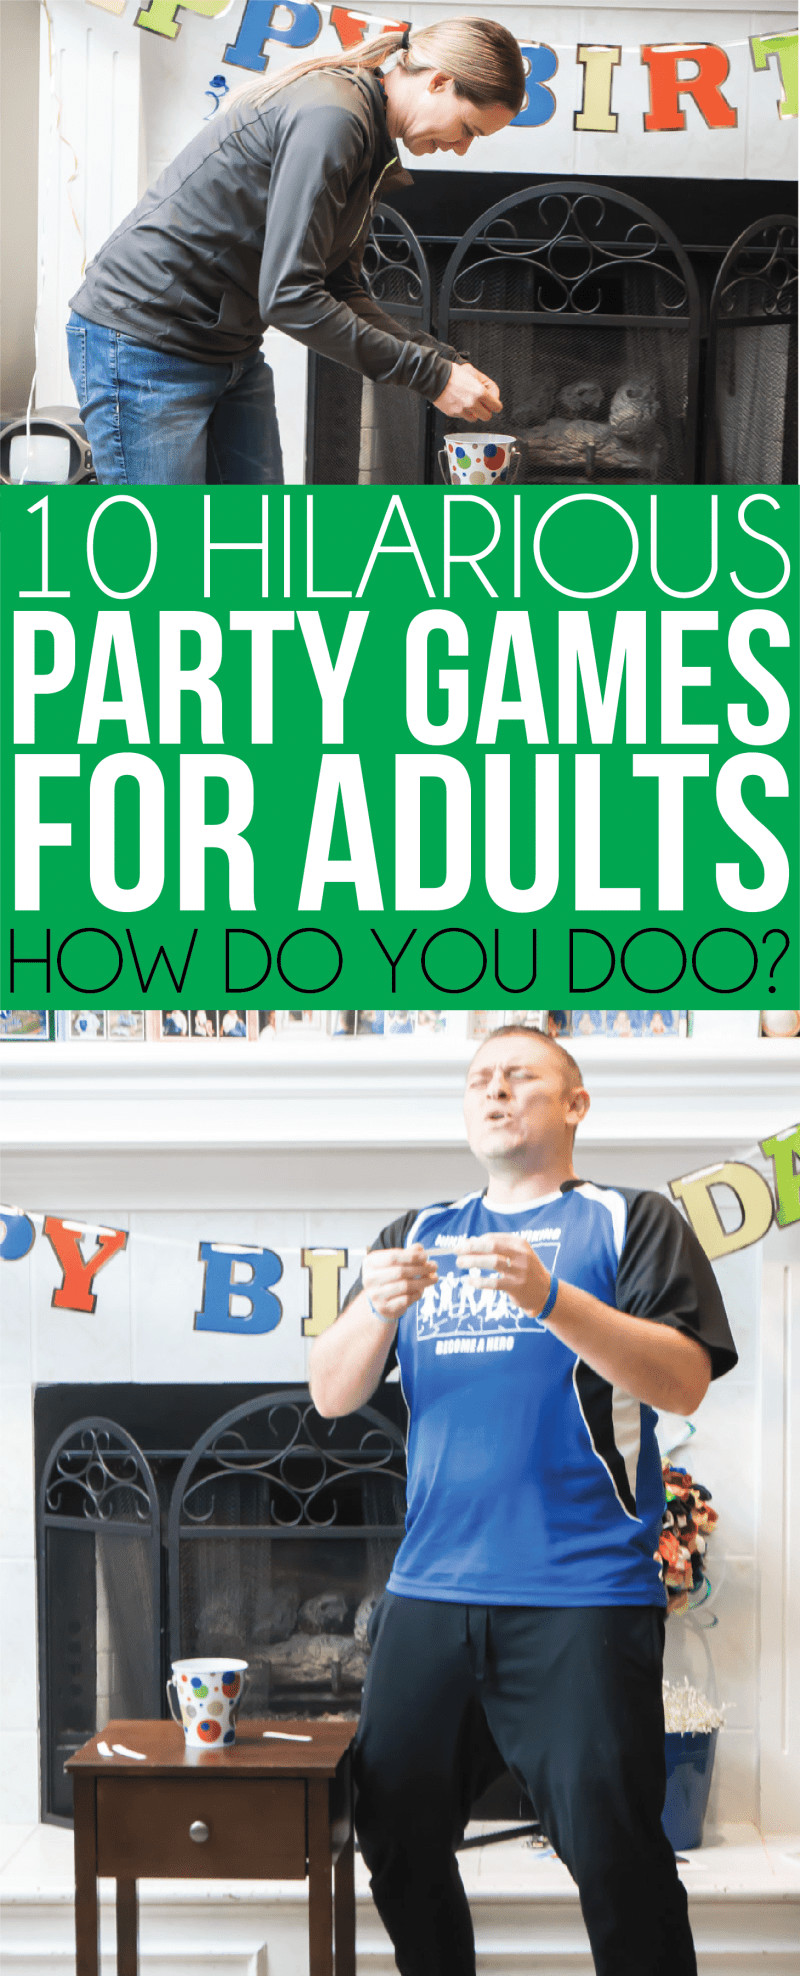 Fun Group Ideas For Adults
 10 Hilarious Party Games for Adults that You ve Probably